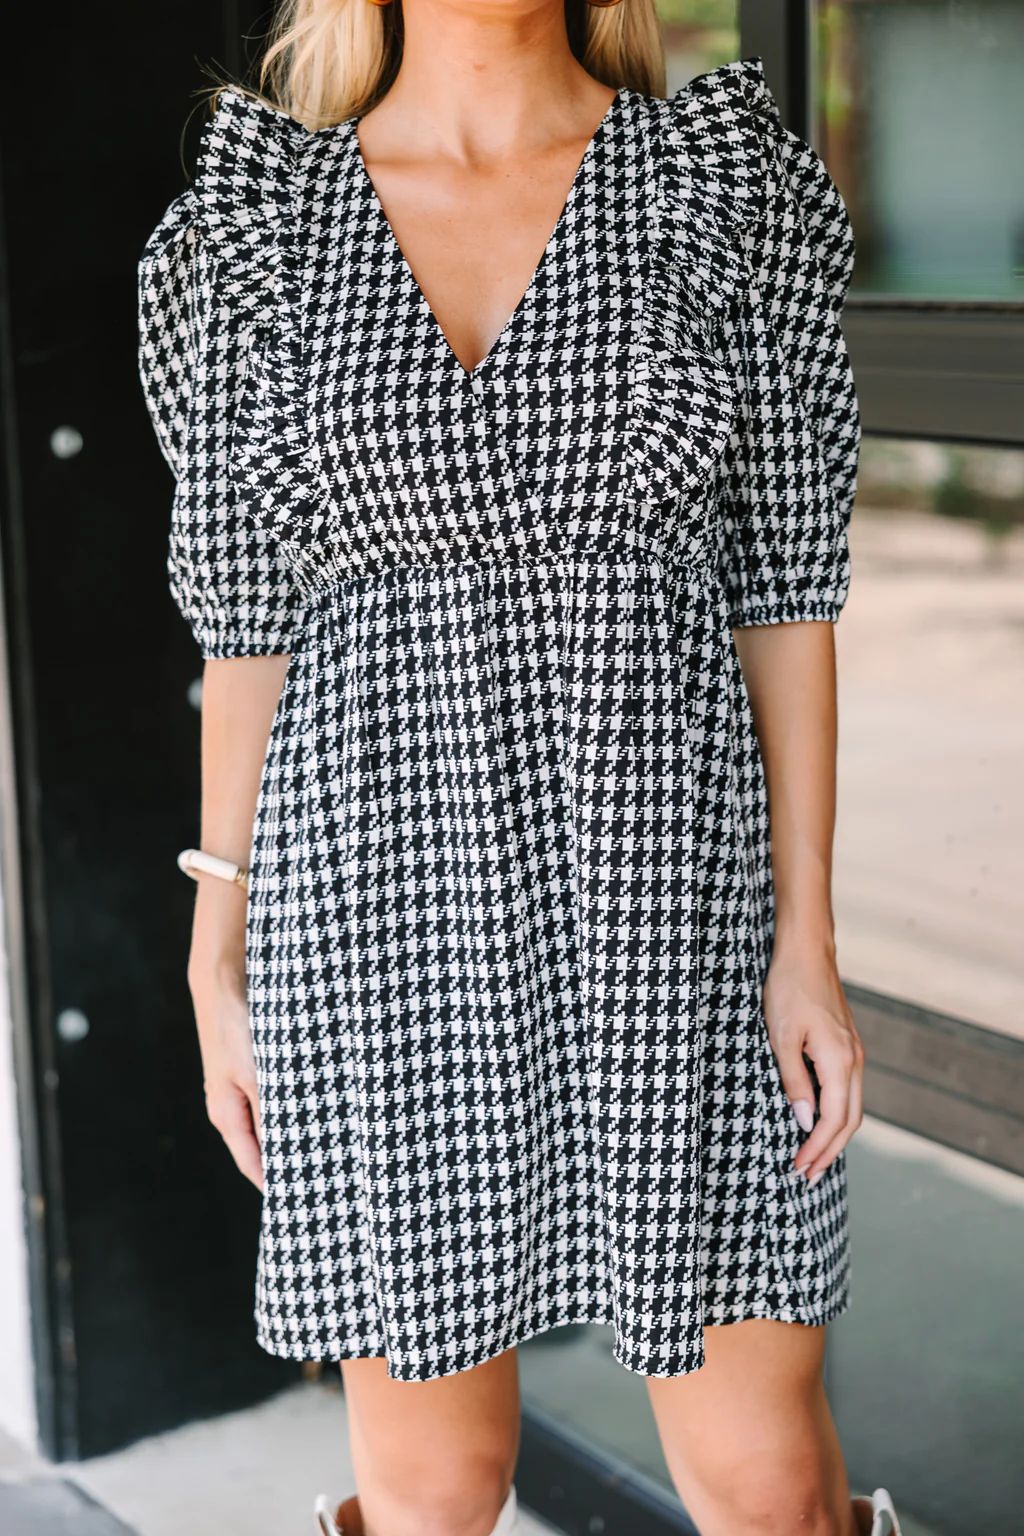 Join Me Later Black Gingham Dress | The Mint Julep Boutique